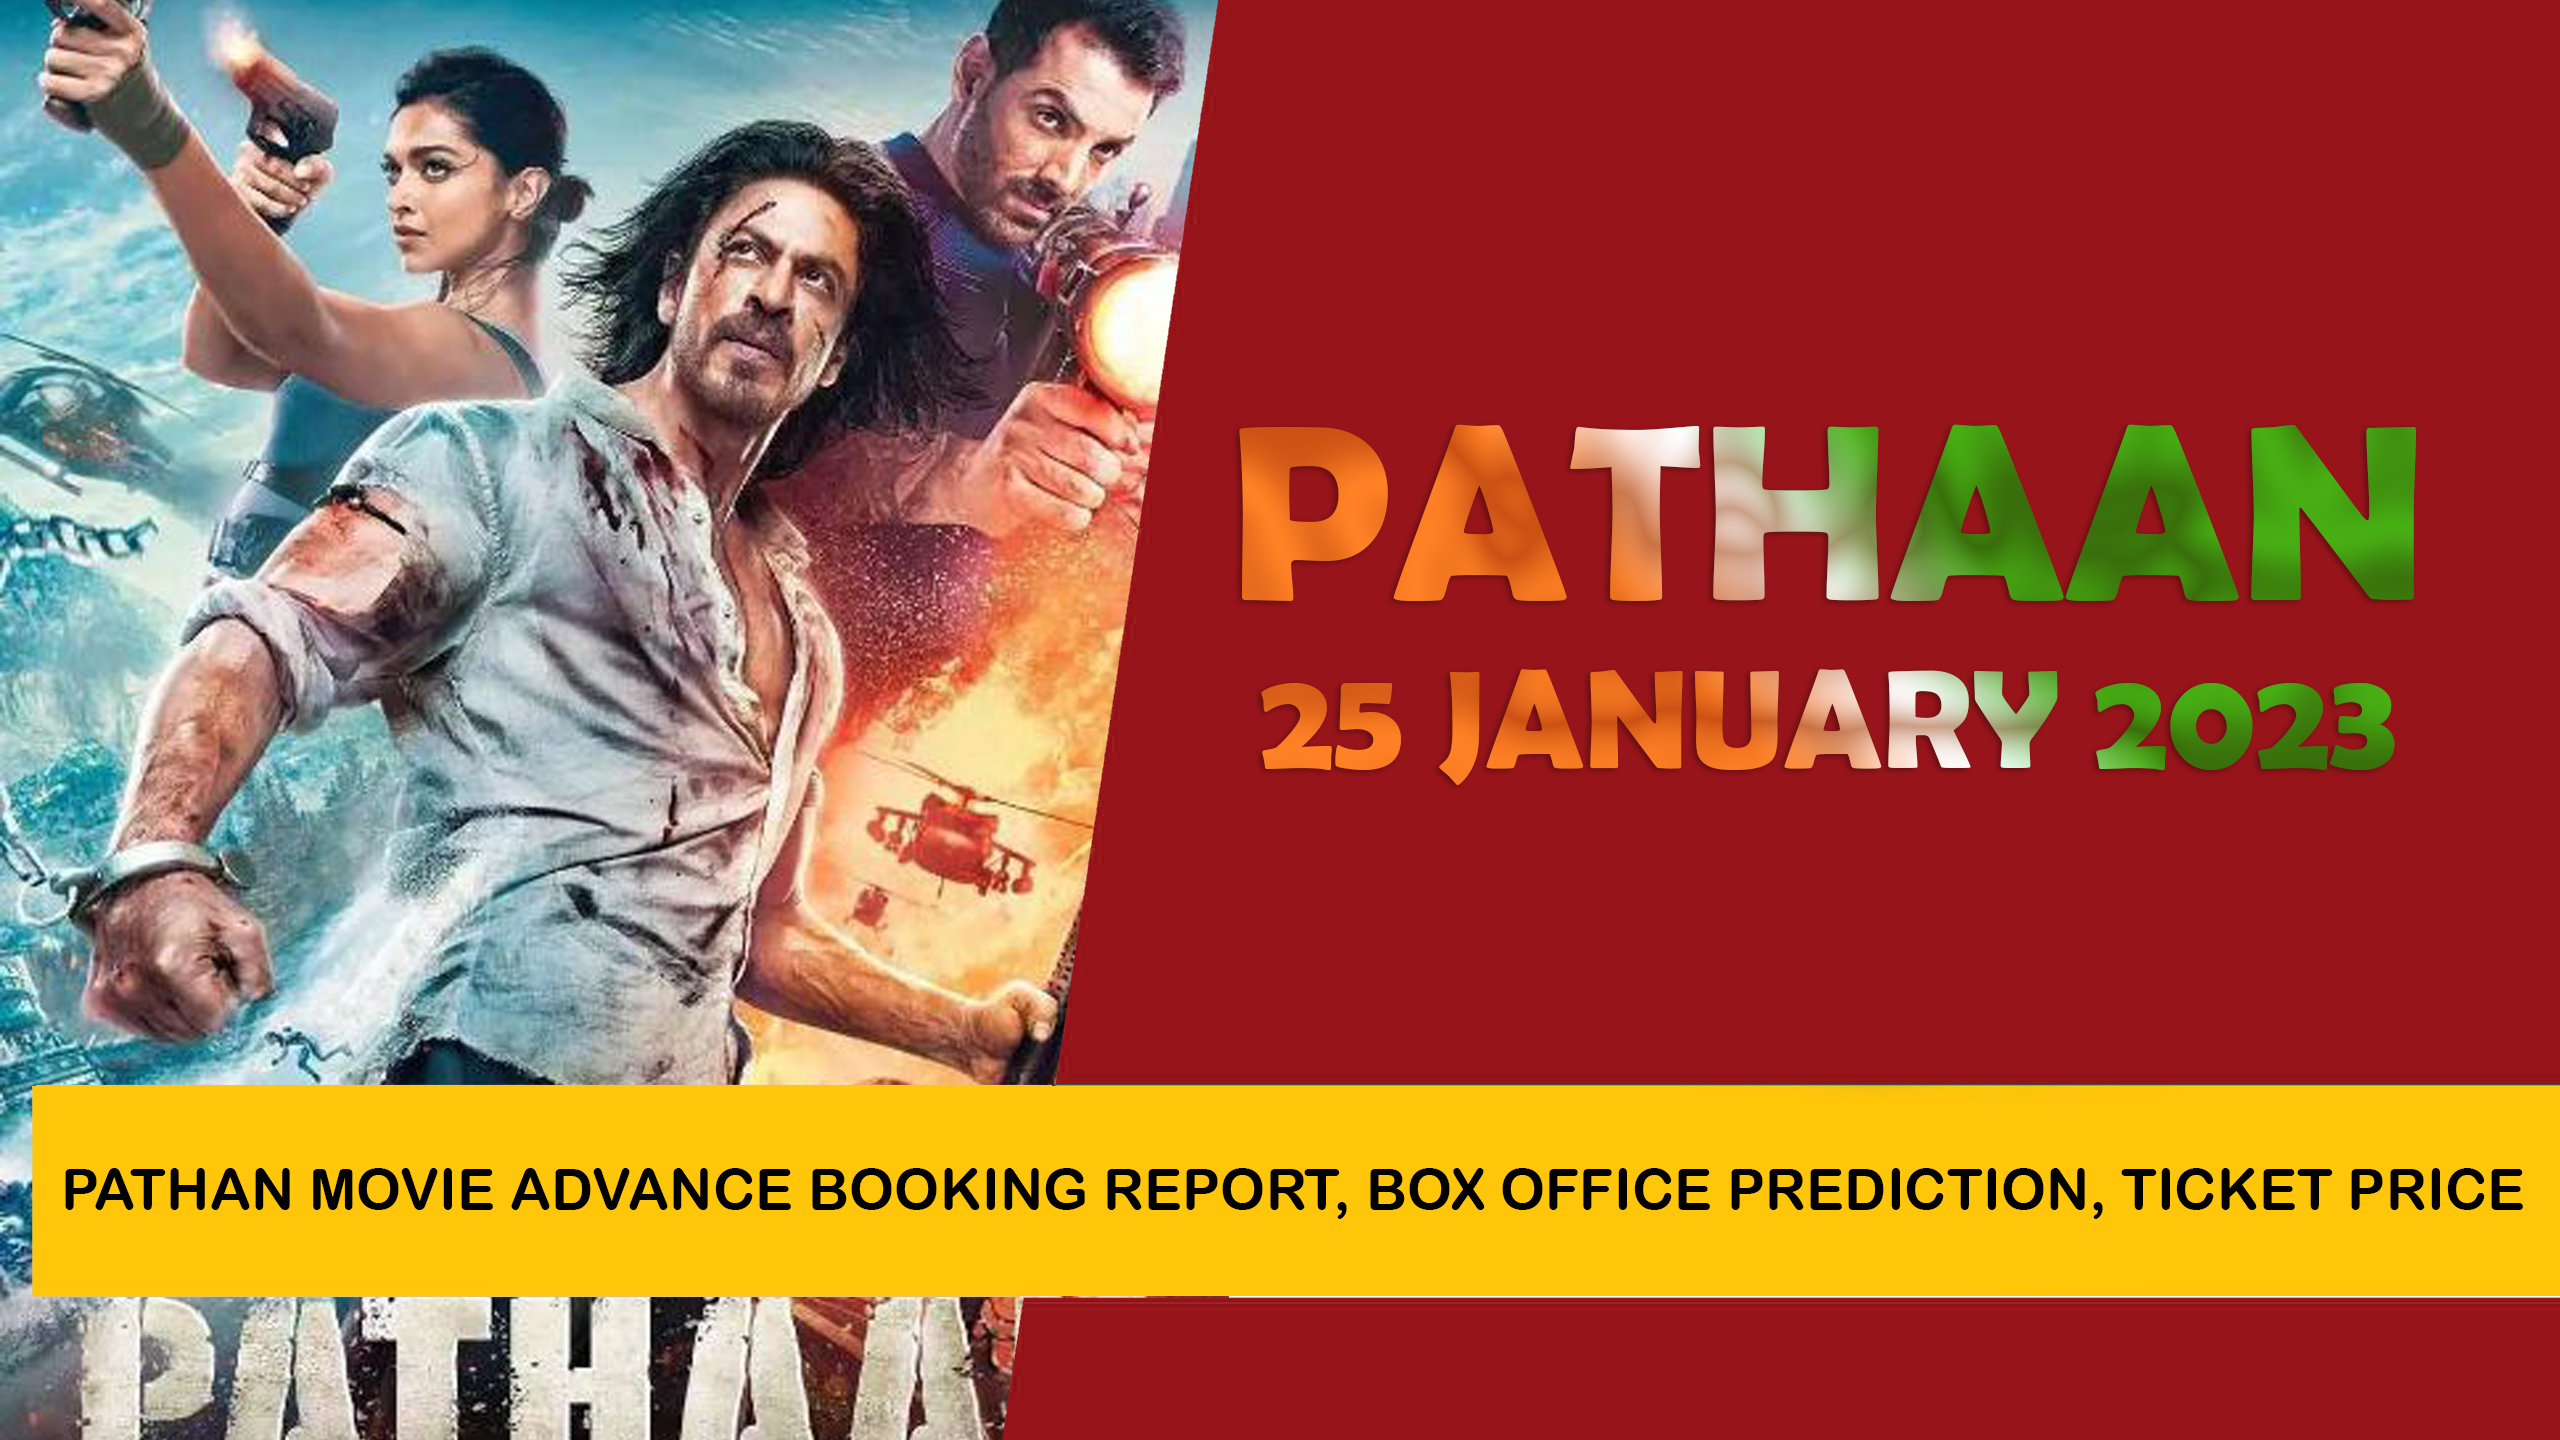 Pathan Movie Advance Booking Report, Box Office Prediction, Ticket Price